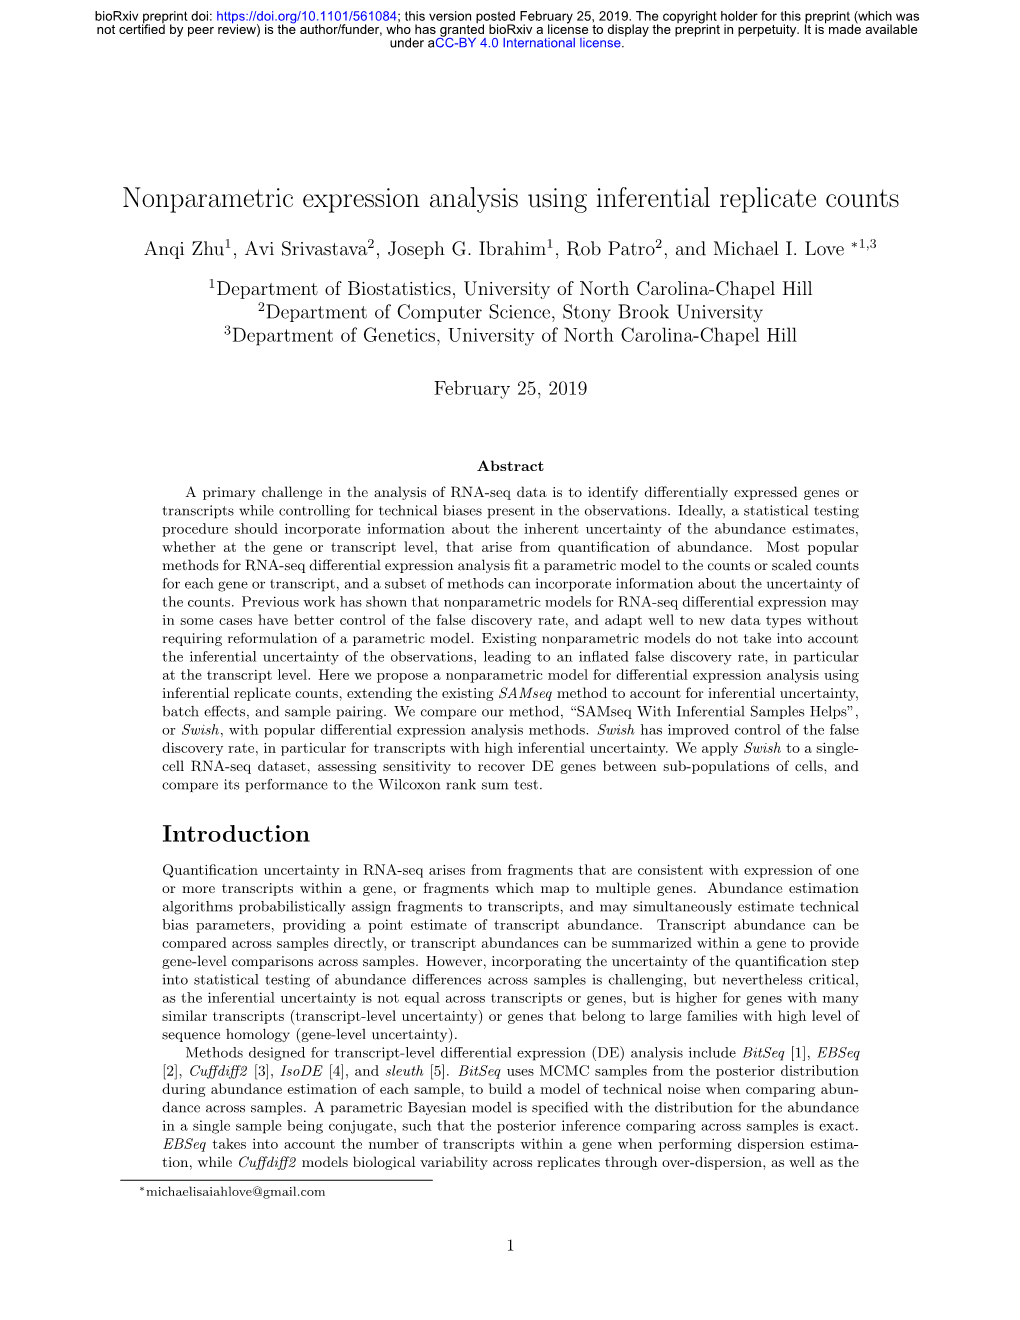 Nonparametric Expression Analysis Using Inferential Replicate Counts